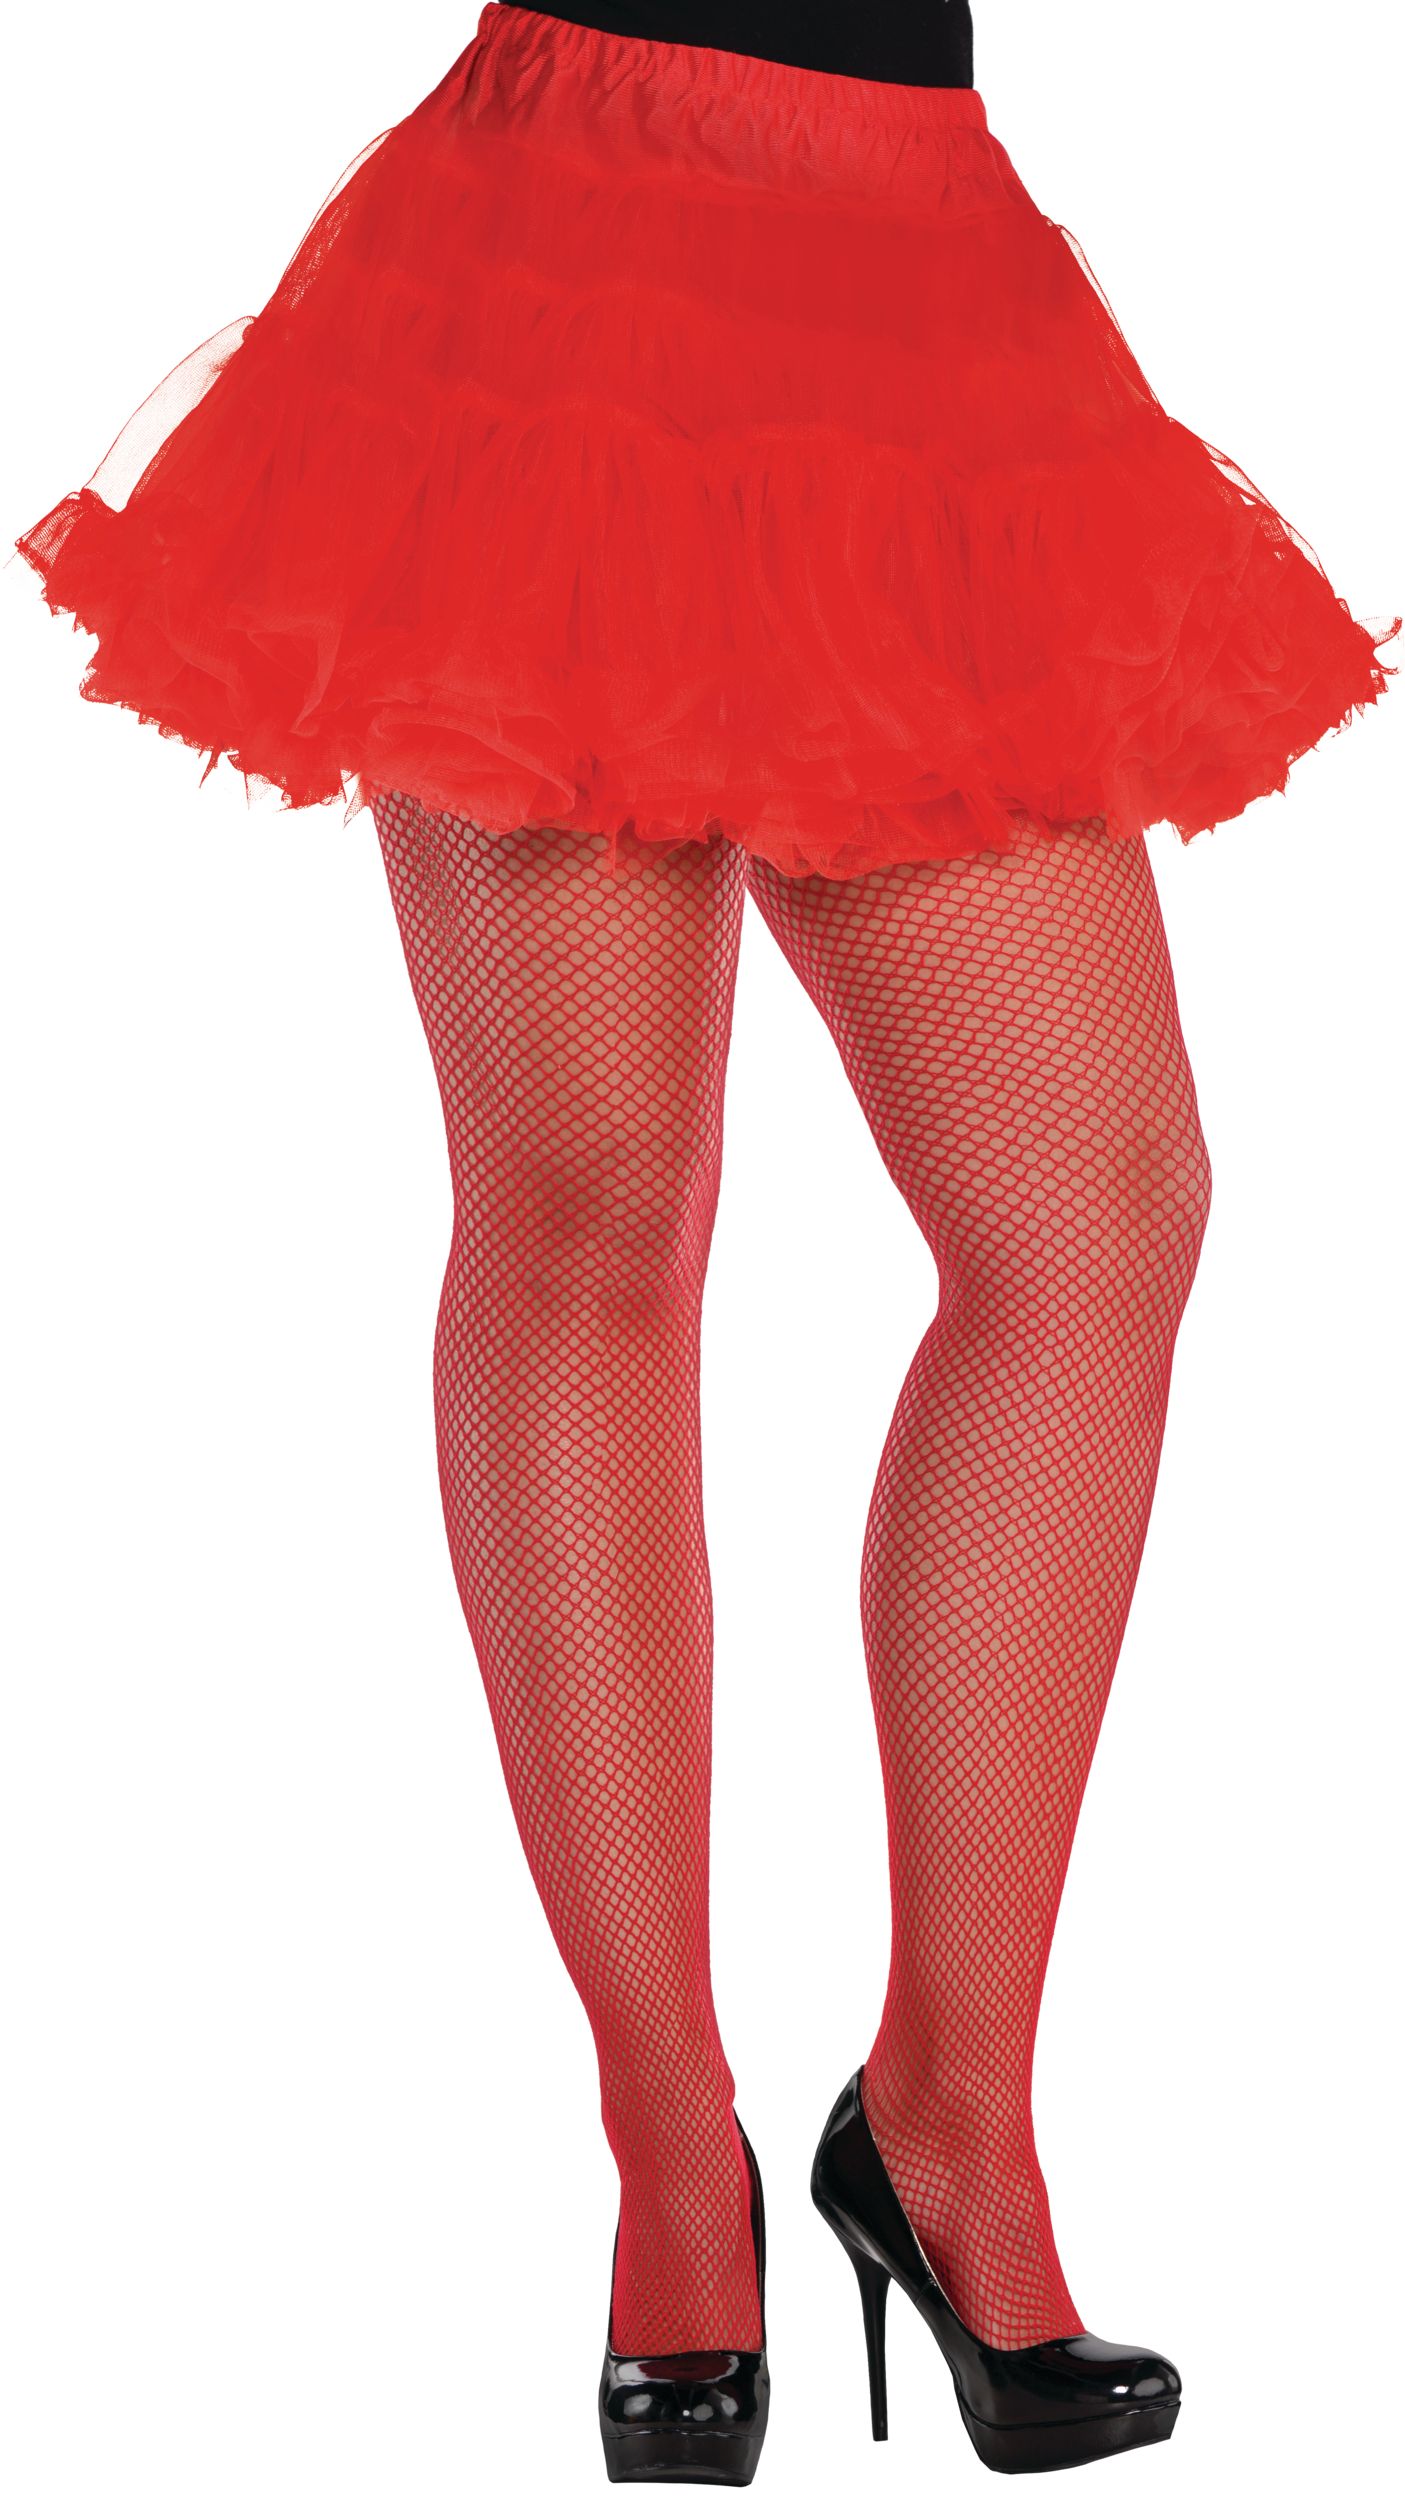 Adult Fishnet Stocking Tights, Red, Plus Size, Wearable Costume Accessory  for Halloween